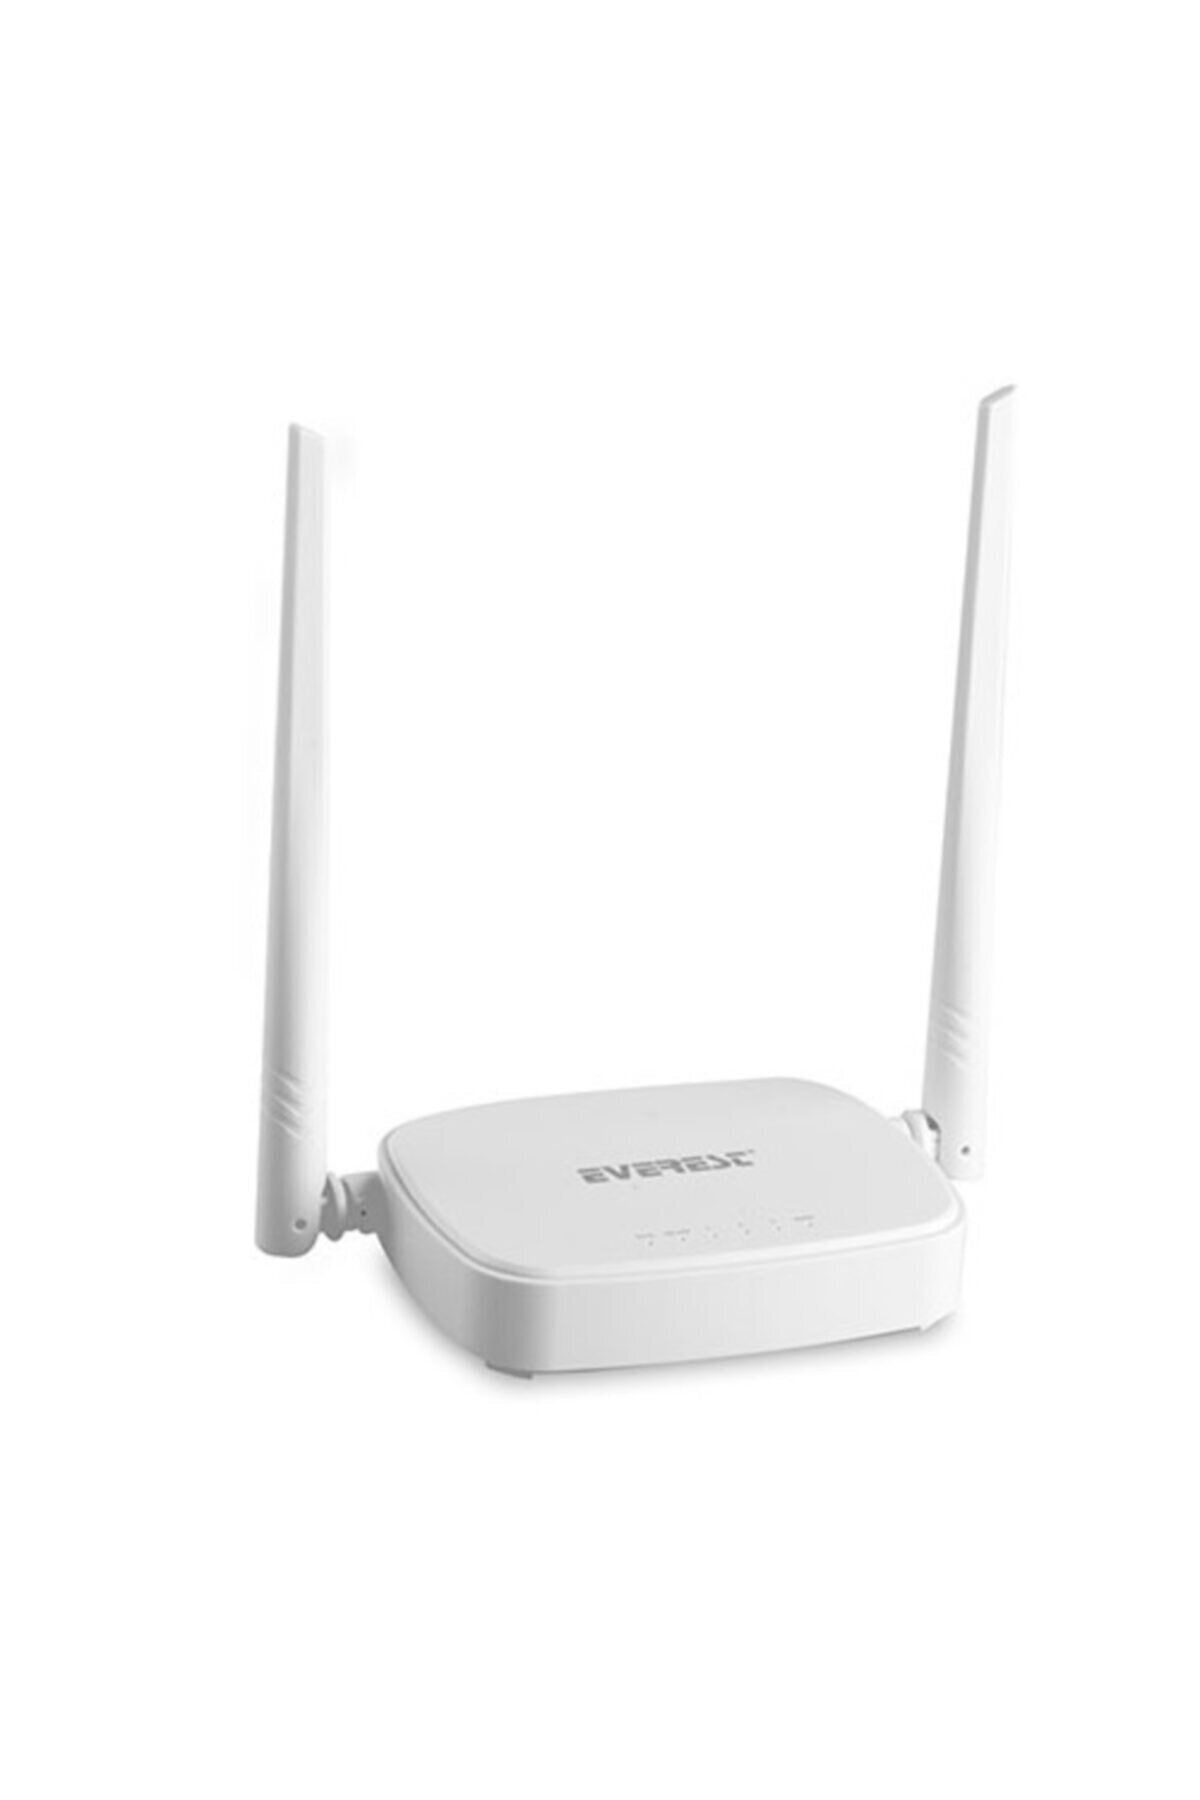 Everest Ewr-301 4 Port 300mbps Repeater 2.4ghz Indoor Access Point 2adet 5dbi Ap/router